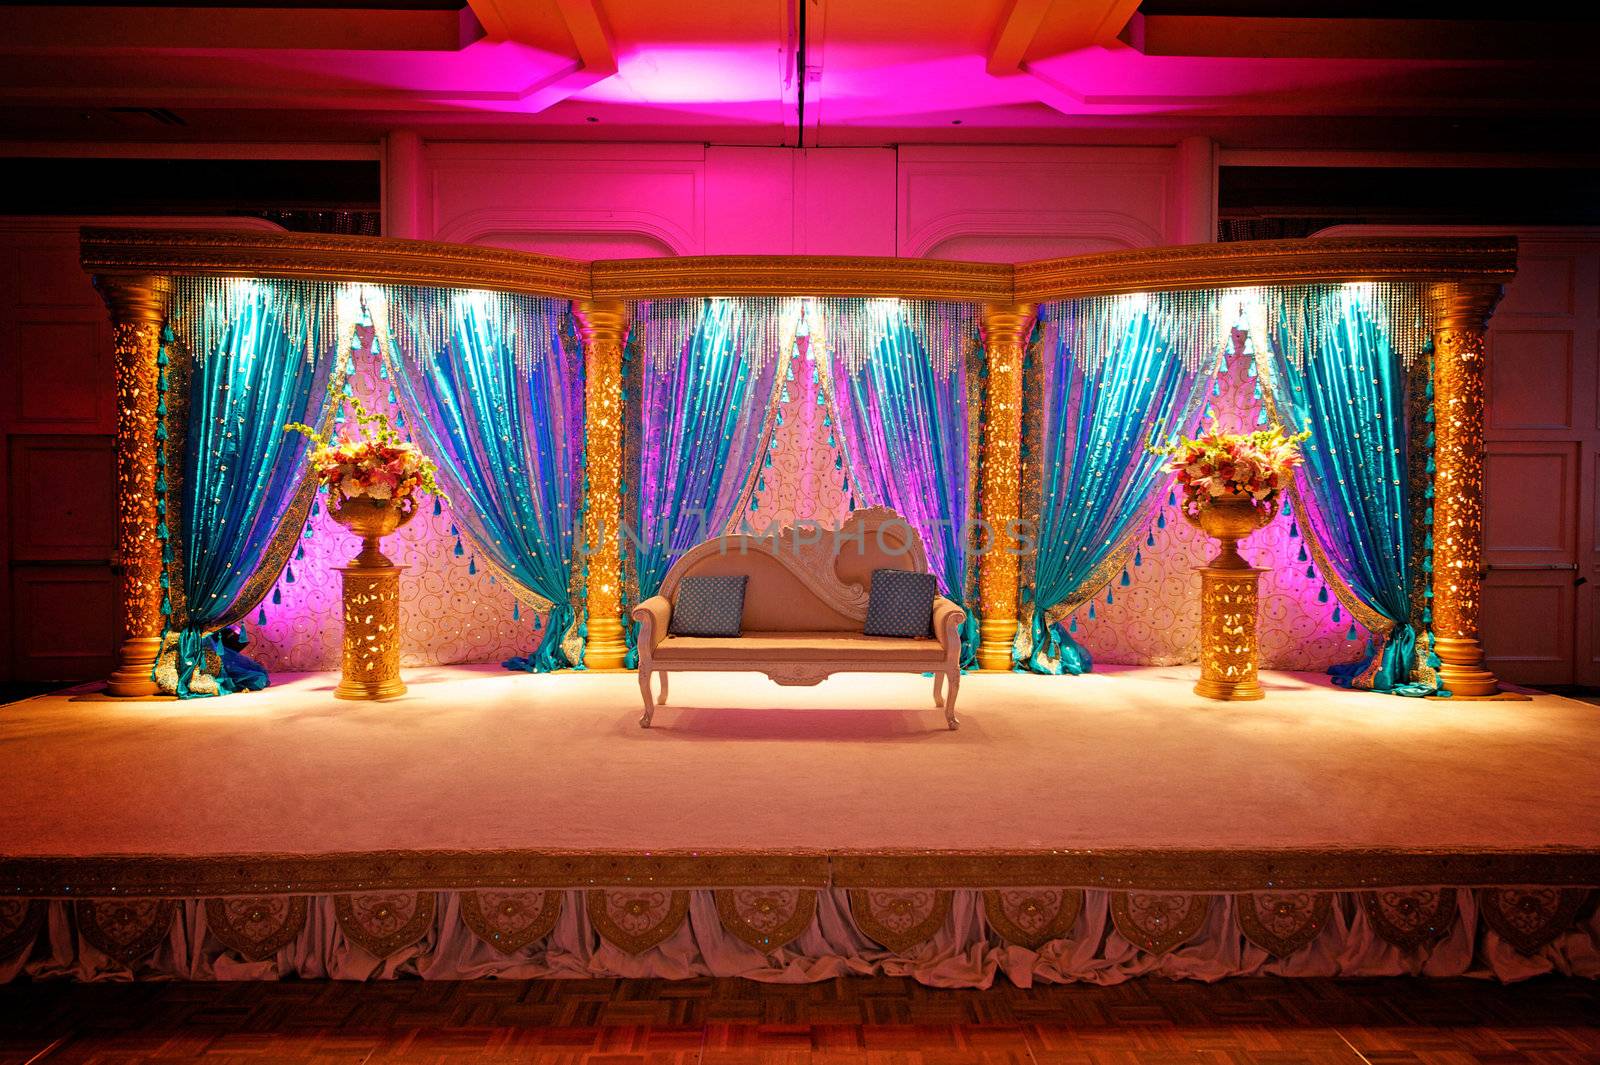 Image of a very colorful Indian Wedding Mandap